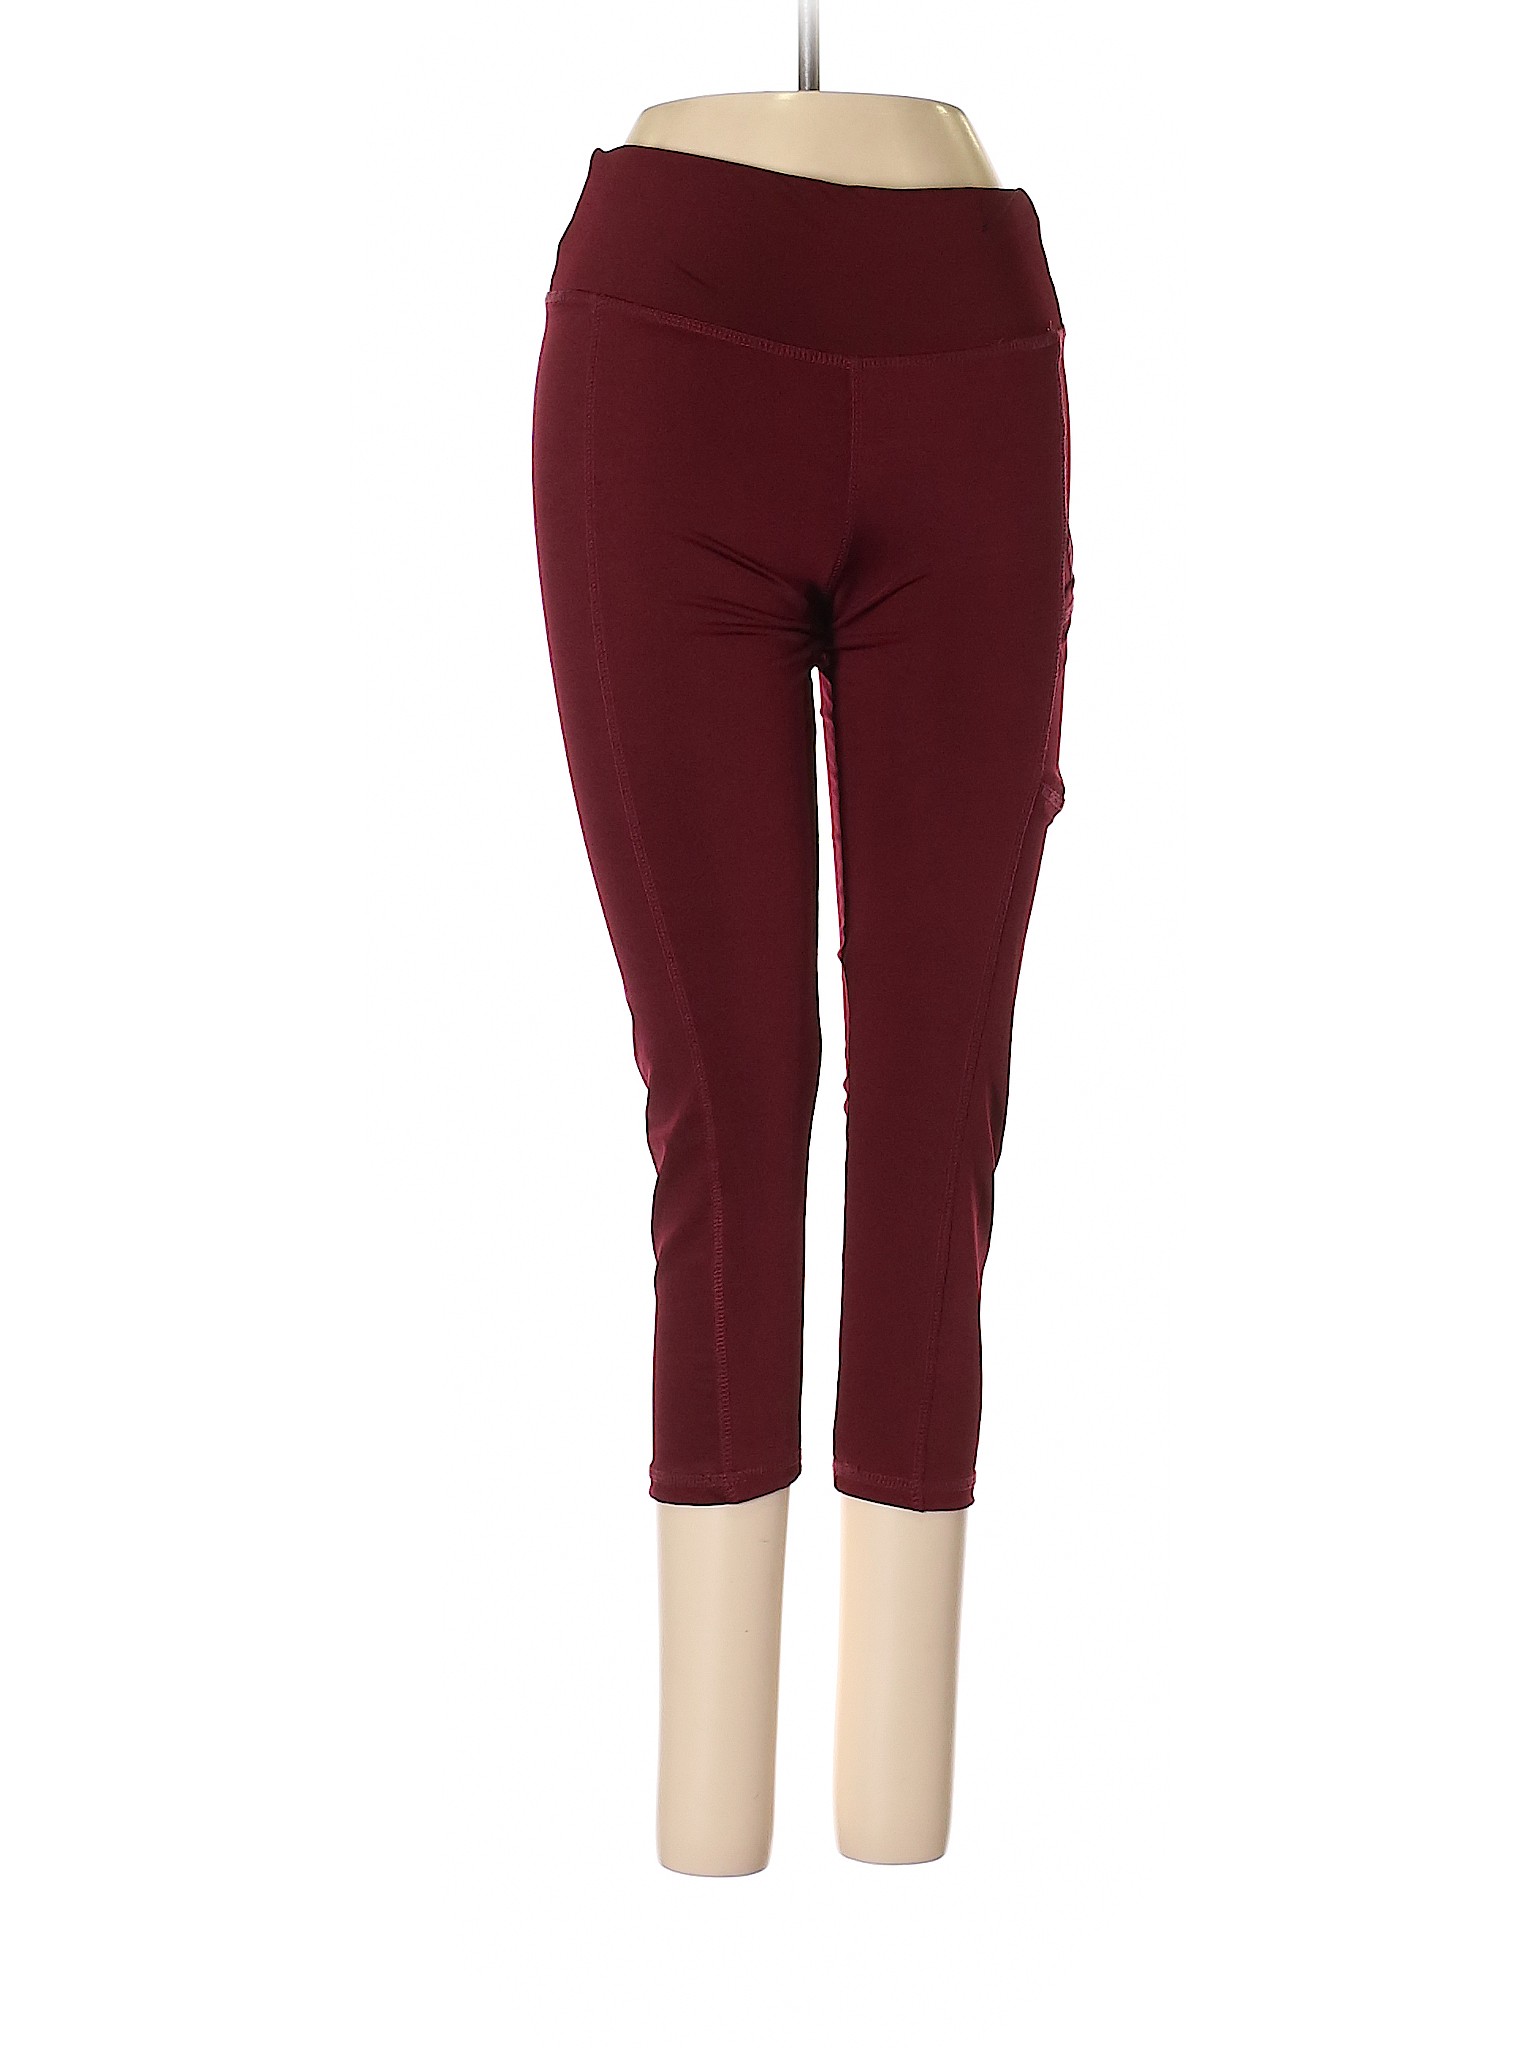 Assorted Brands Solid Maroon Burgundy Active Pants Size S - 77% off ...